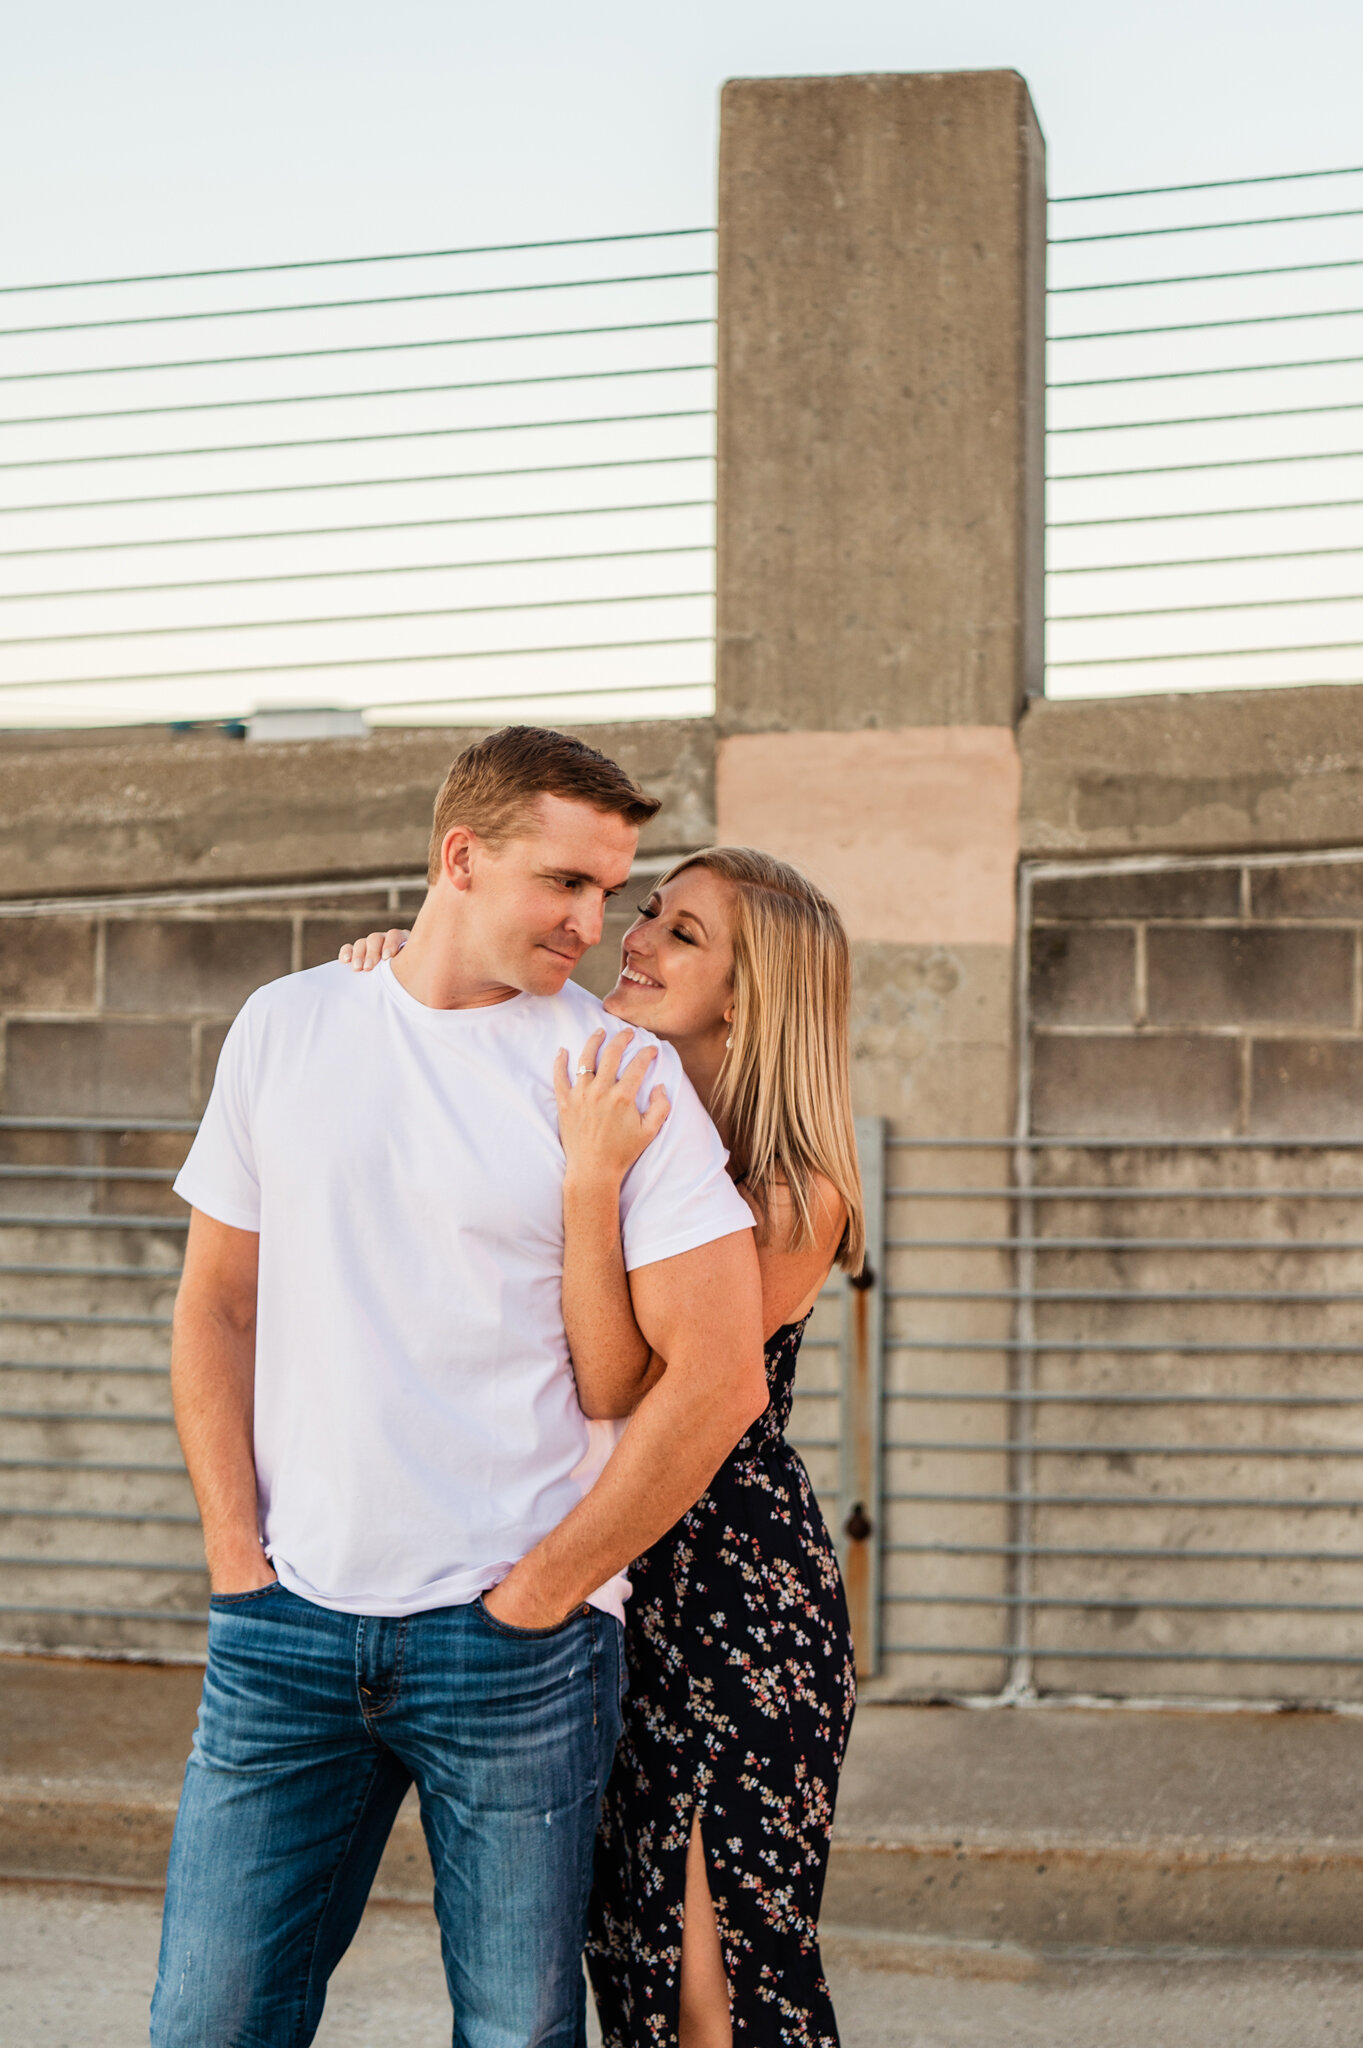 Genesee_Brew_House_High_Falls_Rochester_Engagement_Session_JILL_STUDIO_Rochester_NY_Photographer_5779.jpg